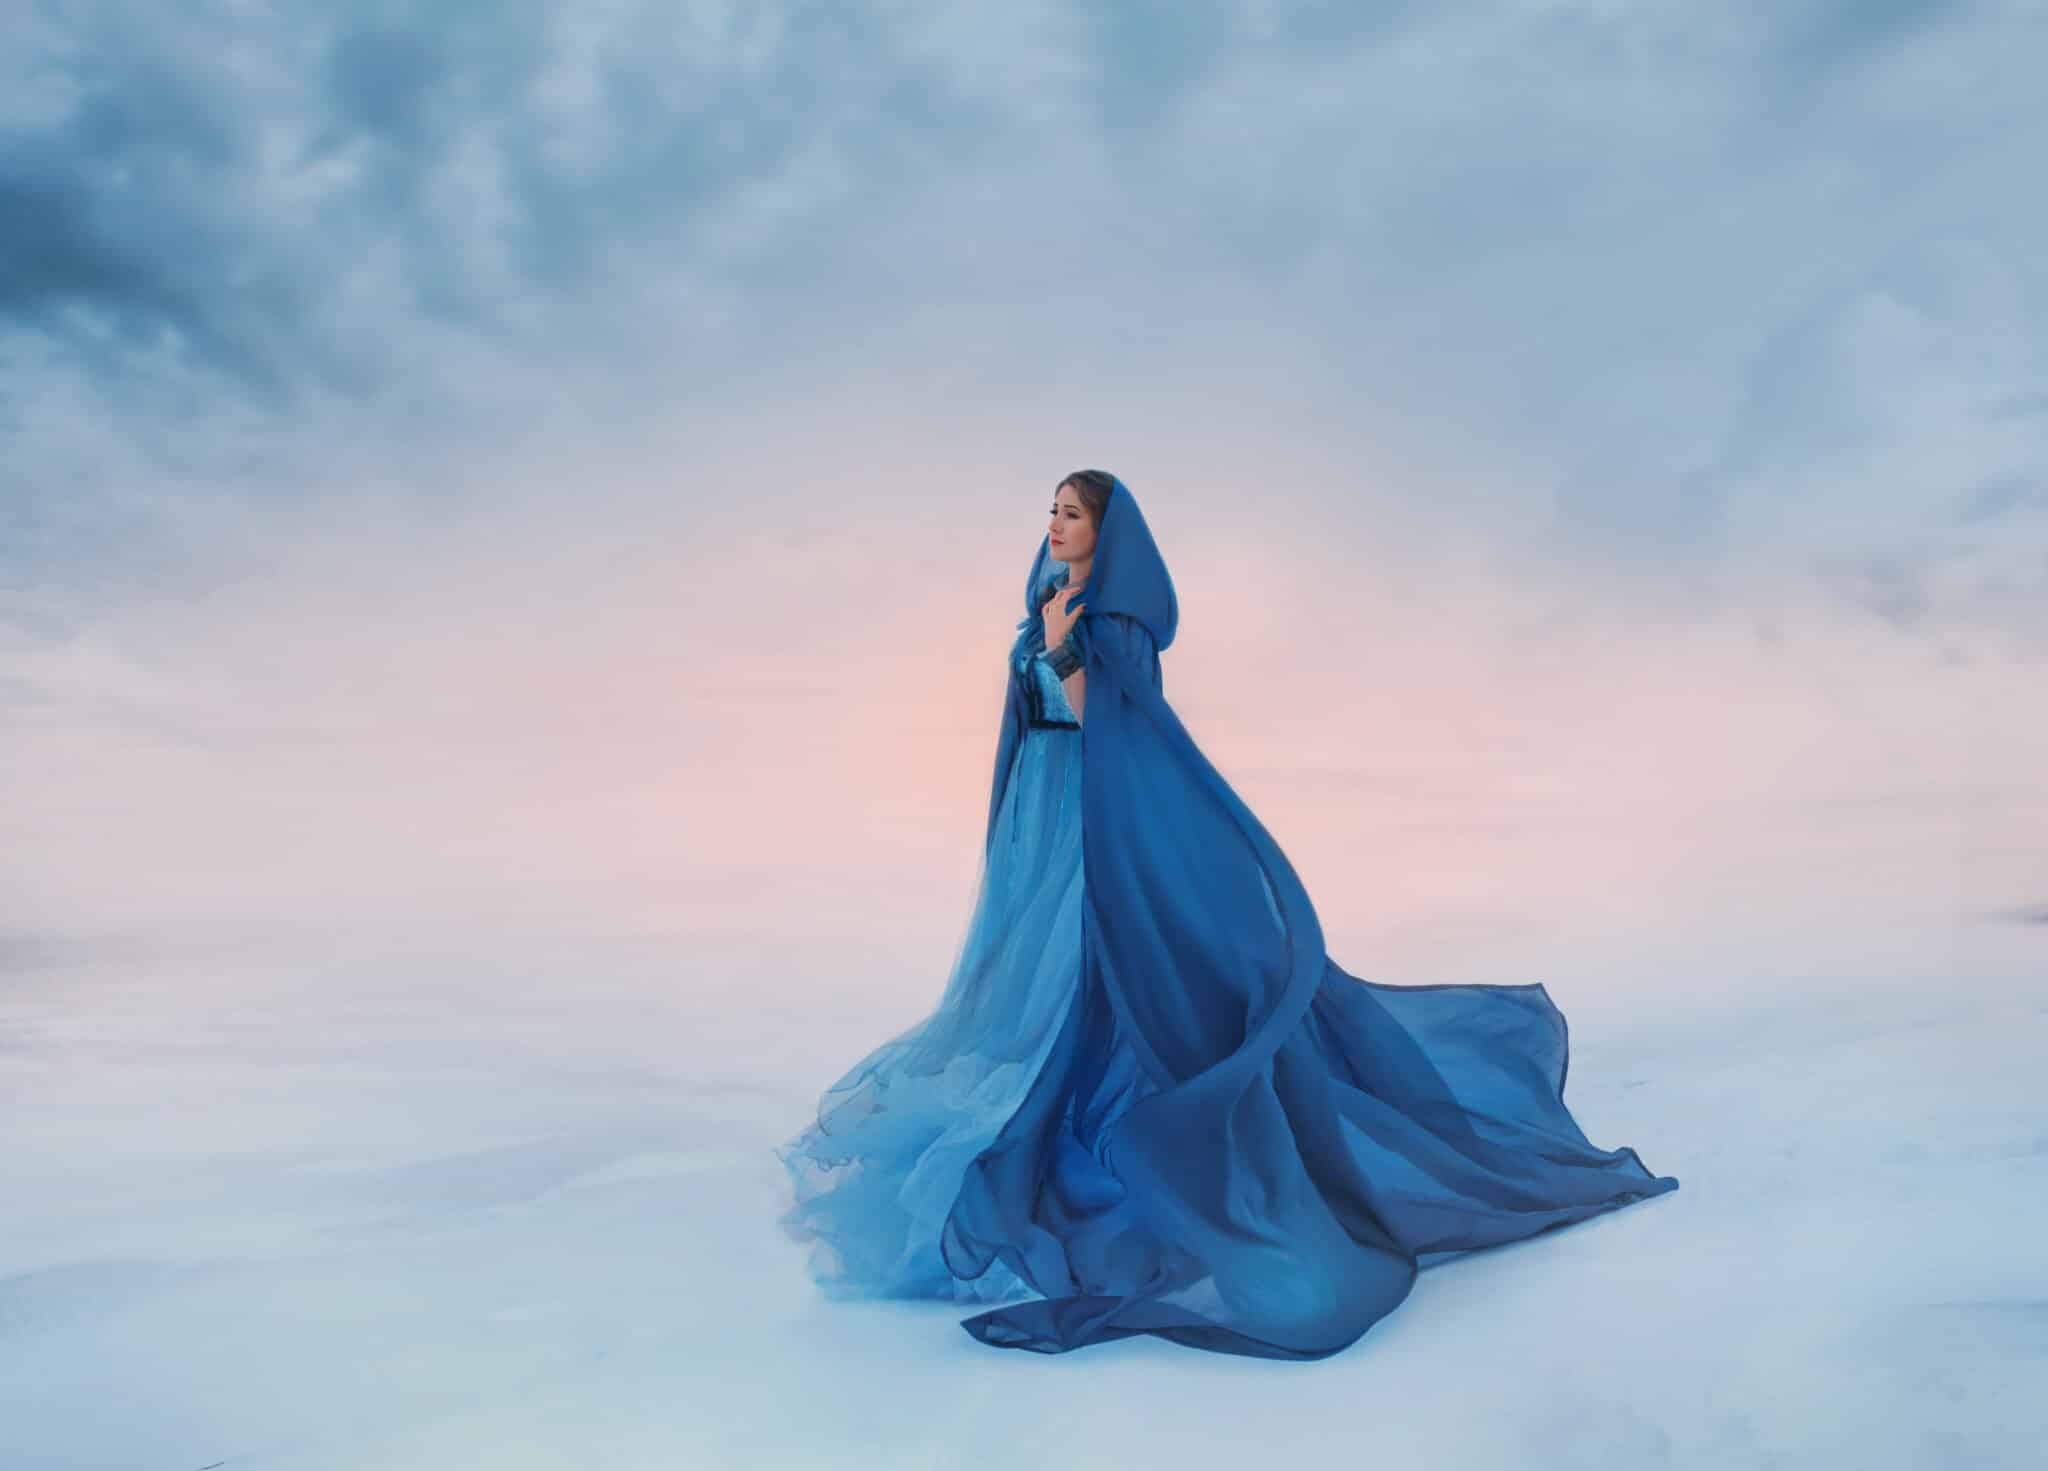 The Snow Queen in a blue raincoat that flutters in the wind.